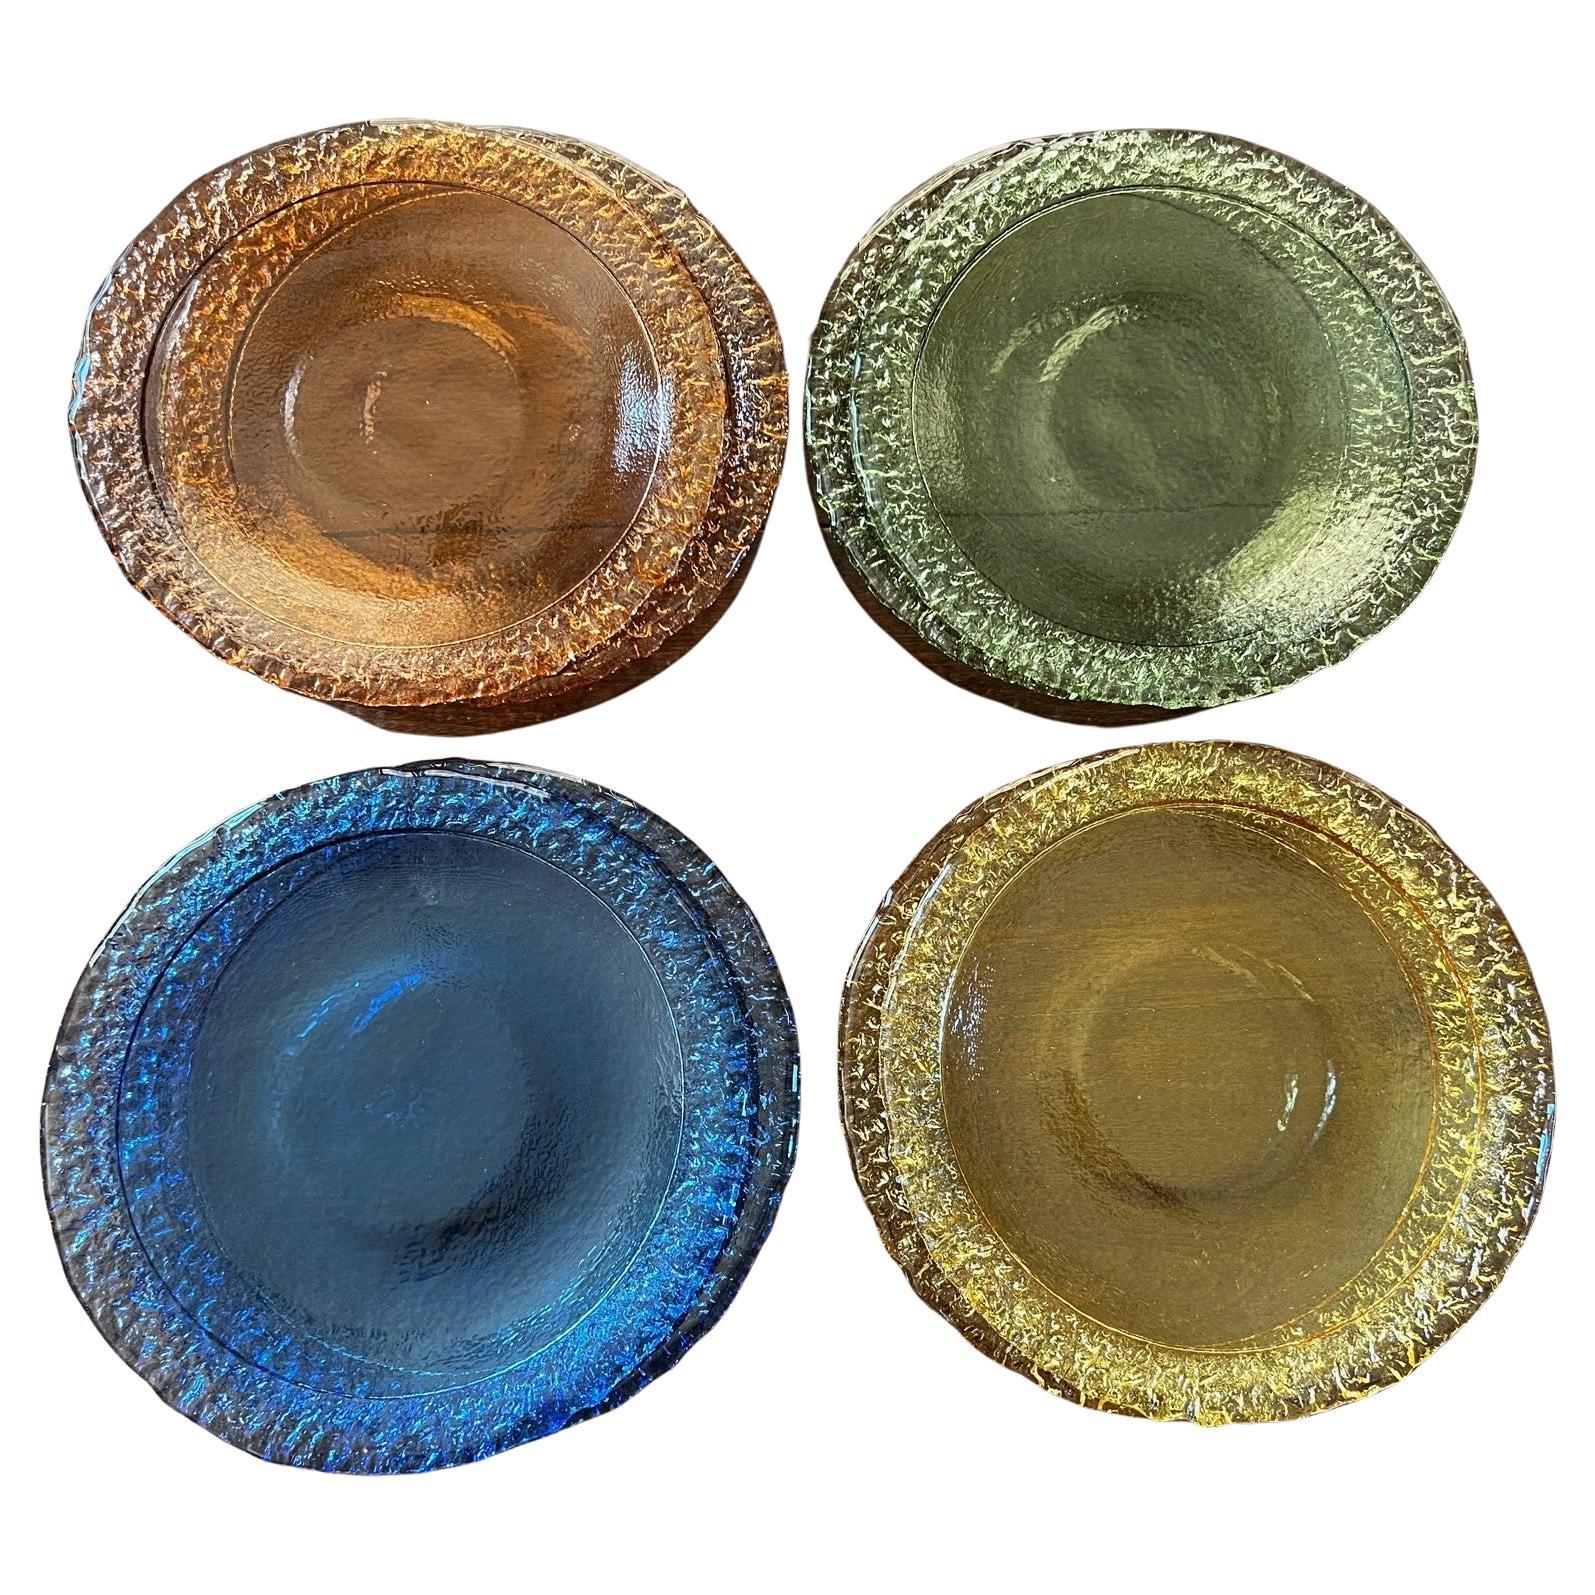 A set of 8 large pressed glass chargers. Two each in yellow, blue, orange and green. The facing side is smooth while the underside is textured. There is a 1.5